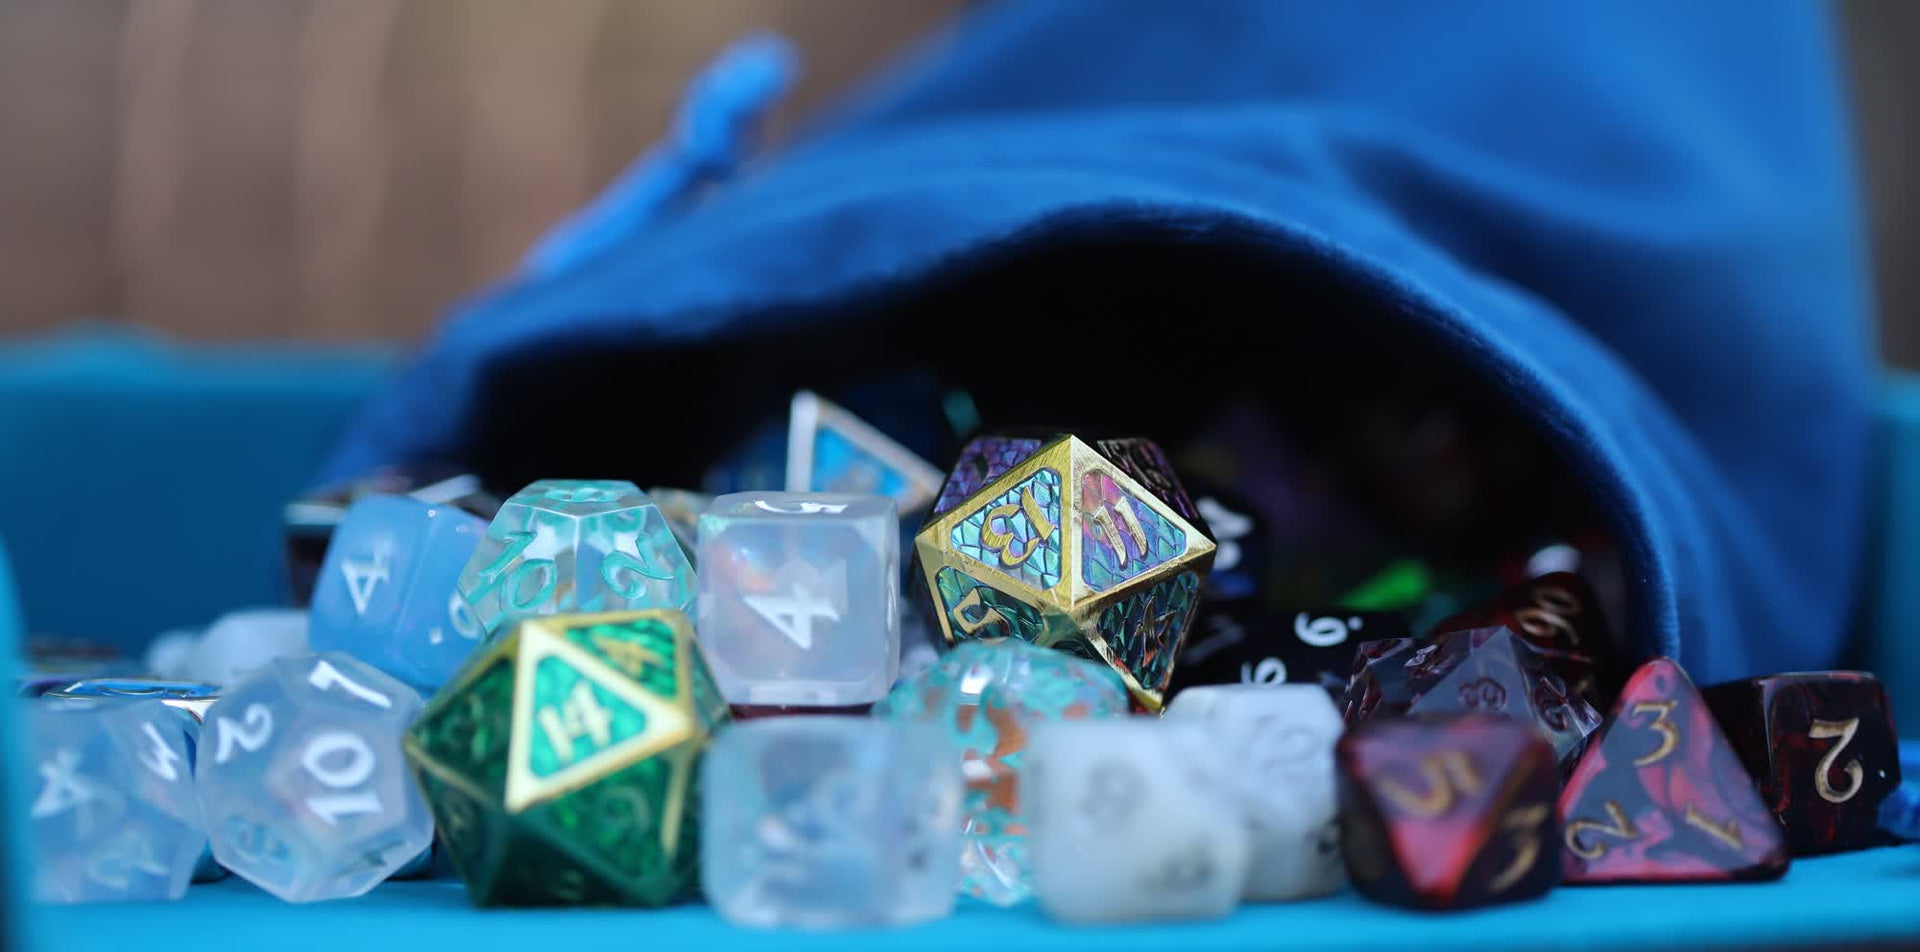  Metal and polymer dice spilling out of a blue dice bag